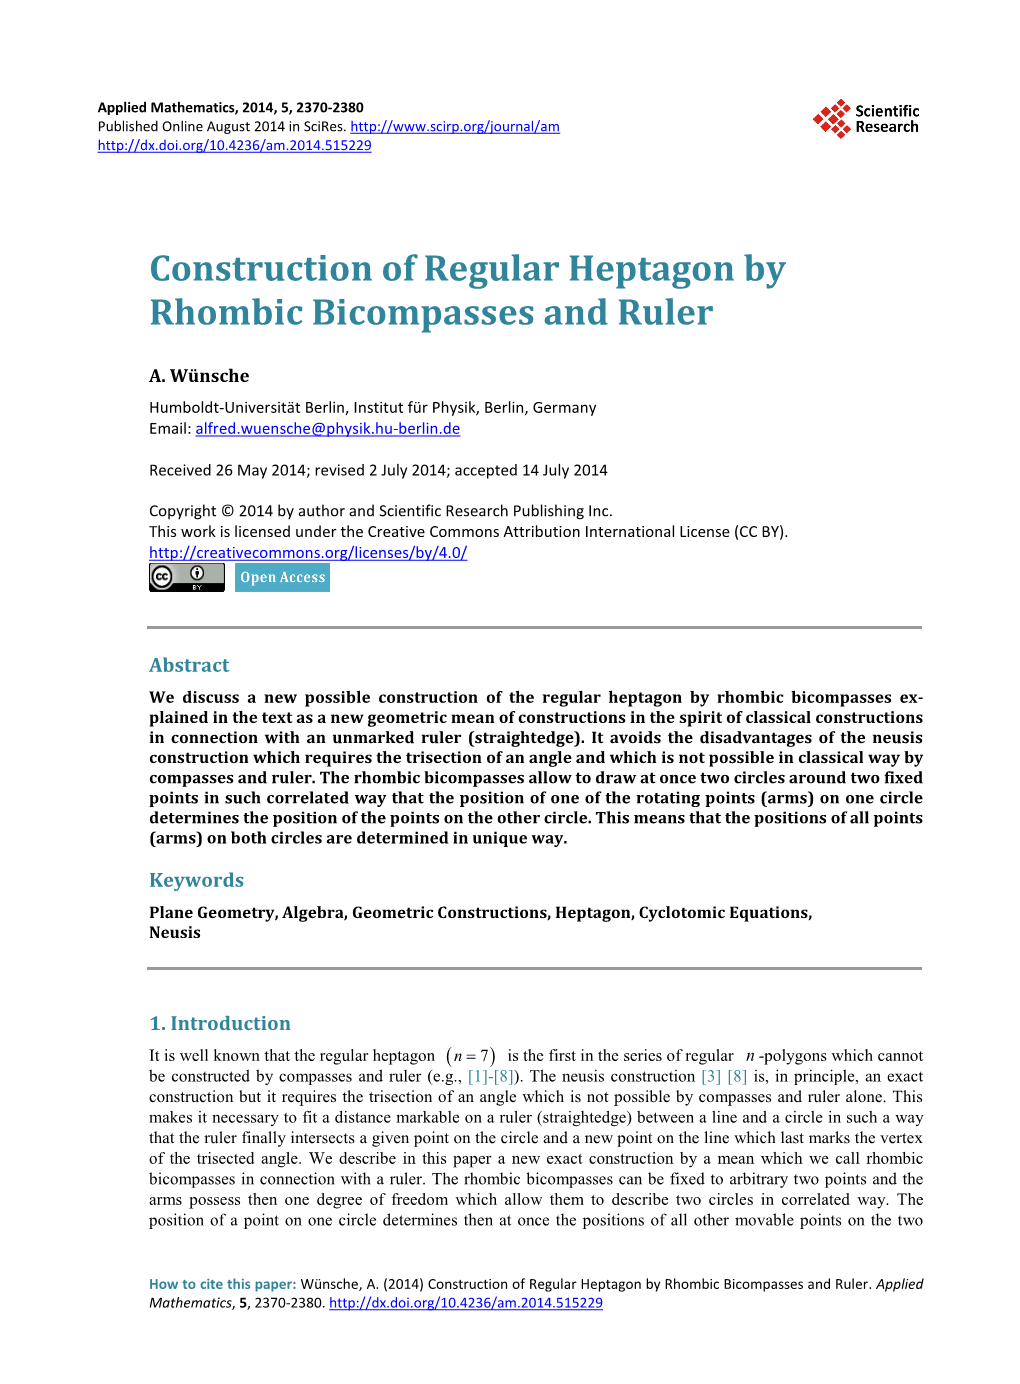 Construction of Regular Heptagon by Rhombic Bicompasses and Ruler